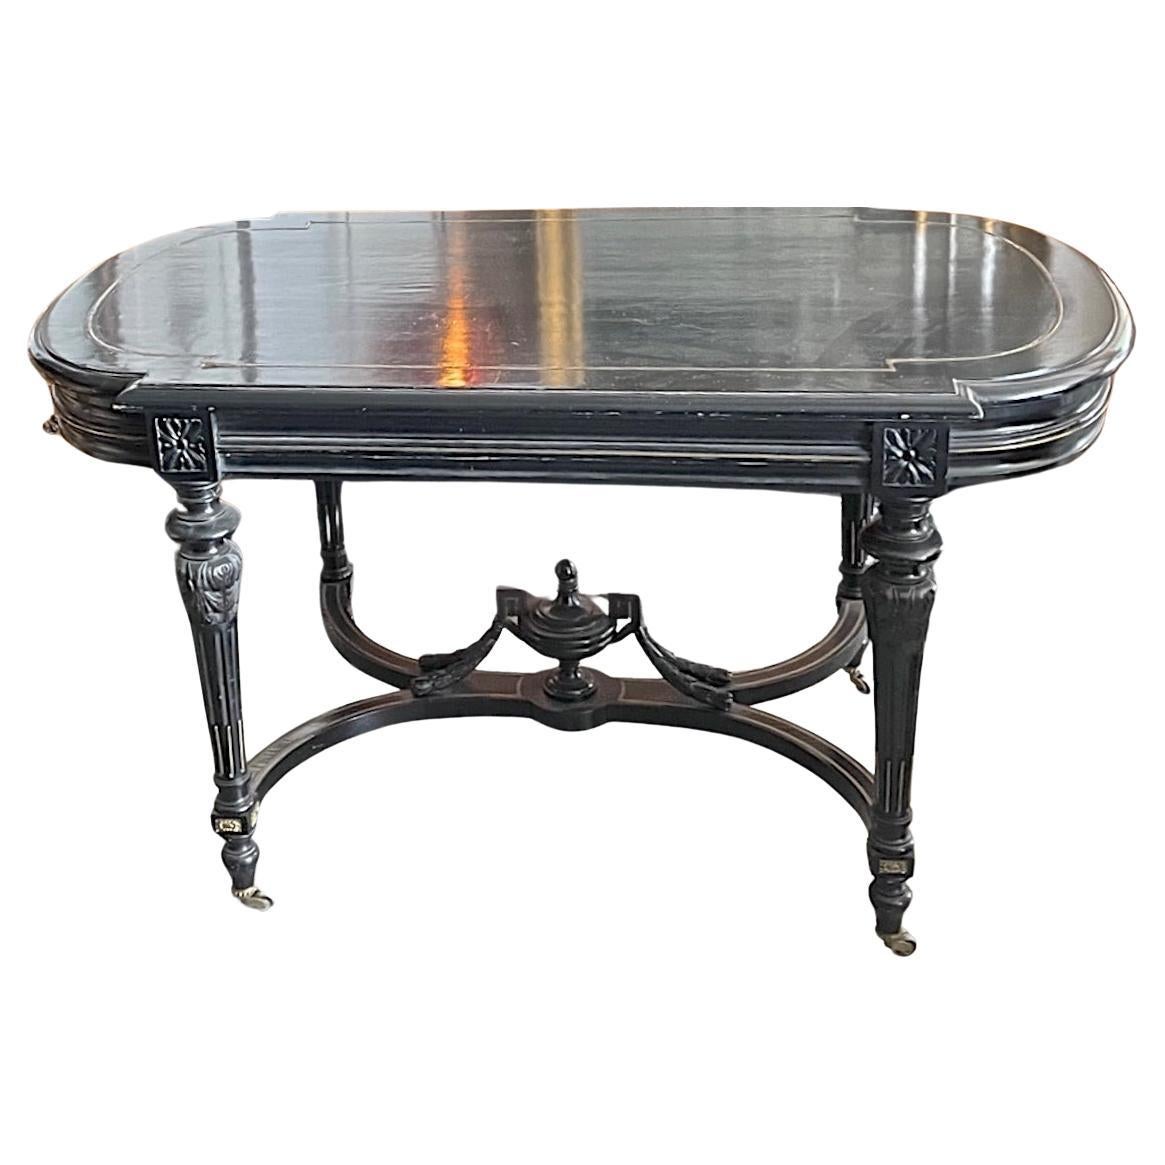 French 19th Century Ebonized Walnut Napoleon III Entry Table With Brass Inlay In Distressed Condition For Sale In Santa Monica, CA